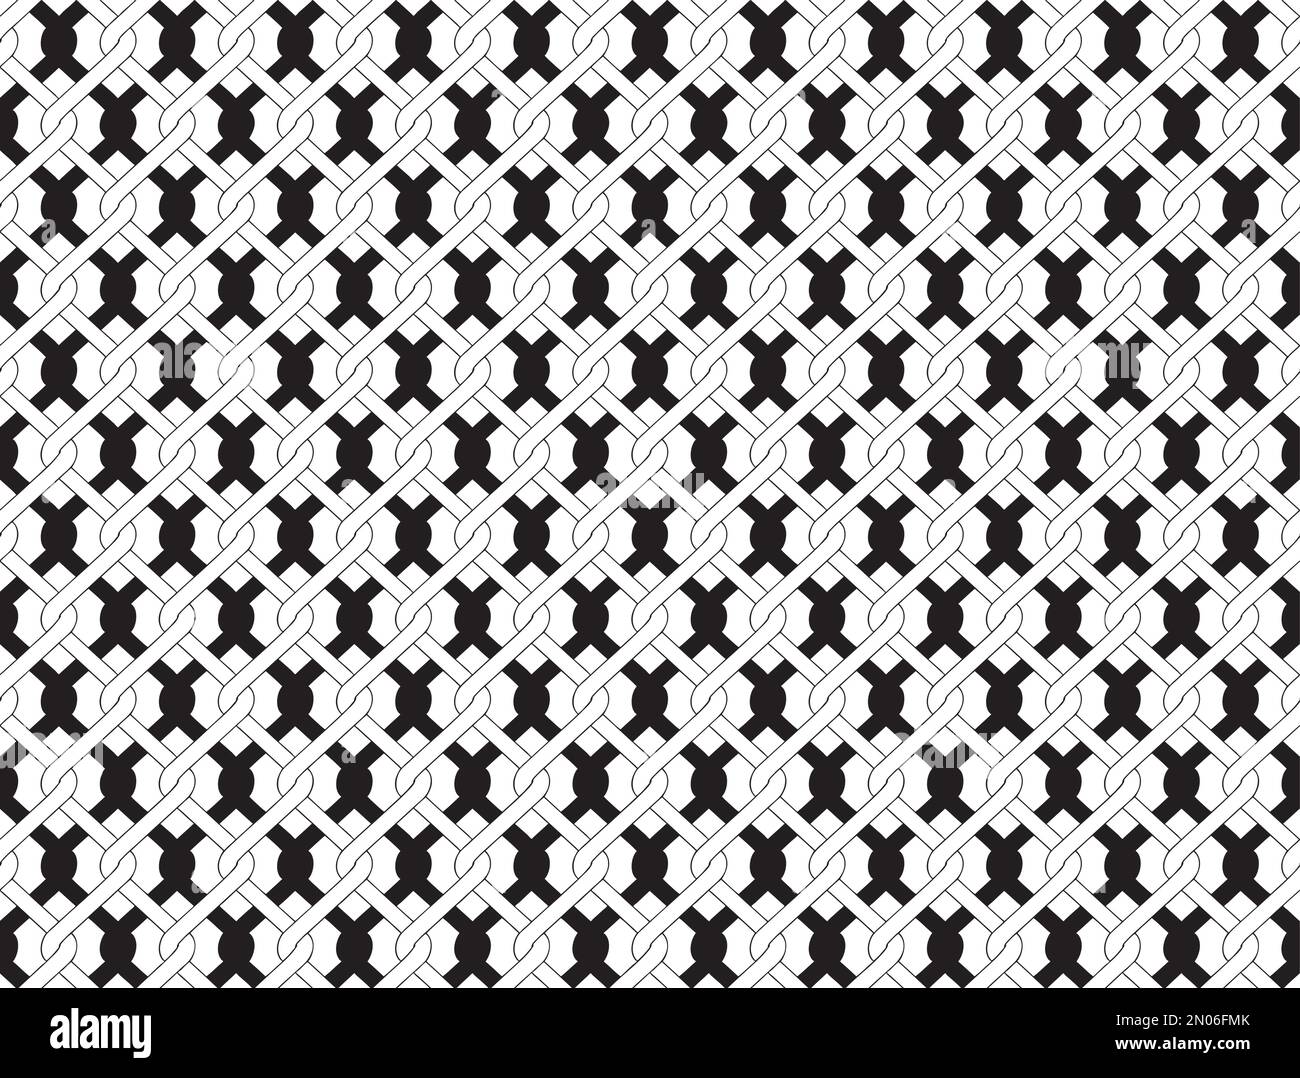 Illustration of chain link fence seamless isolated on white Stock Vector